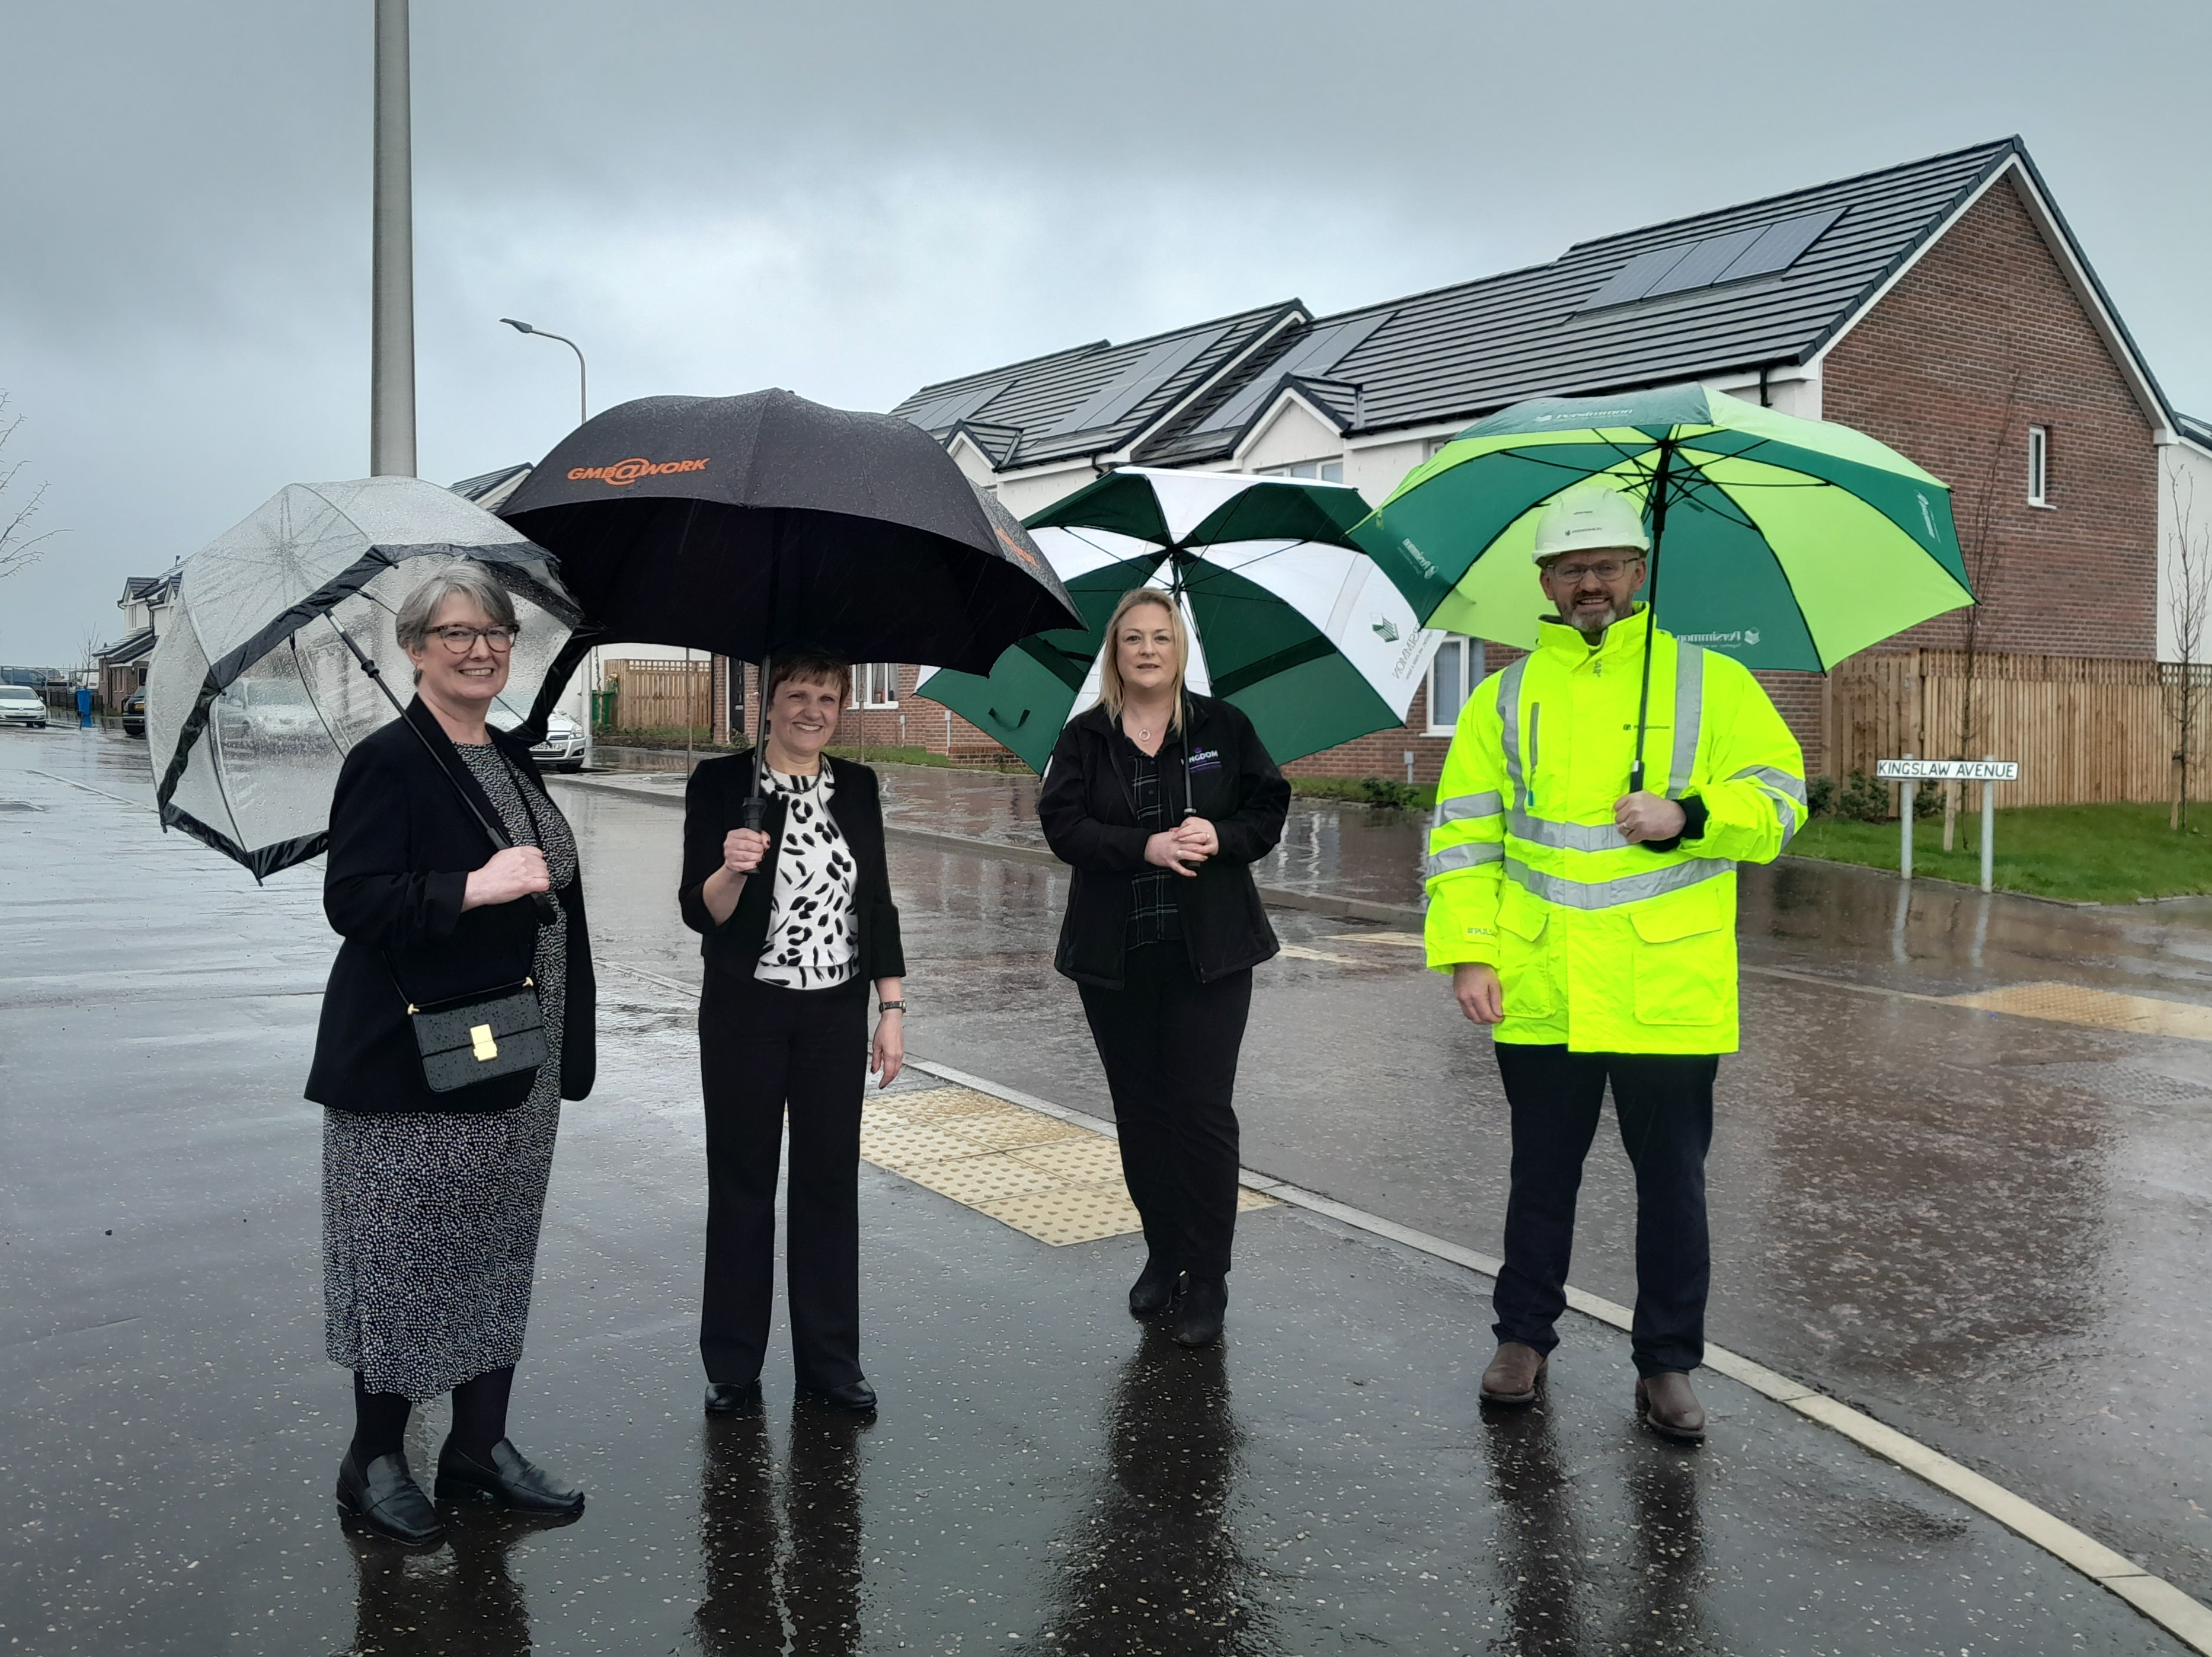 New affordable homes to benefit Kirkcaldy families